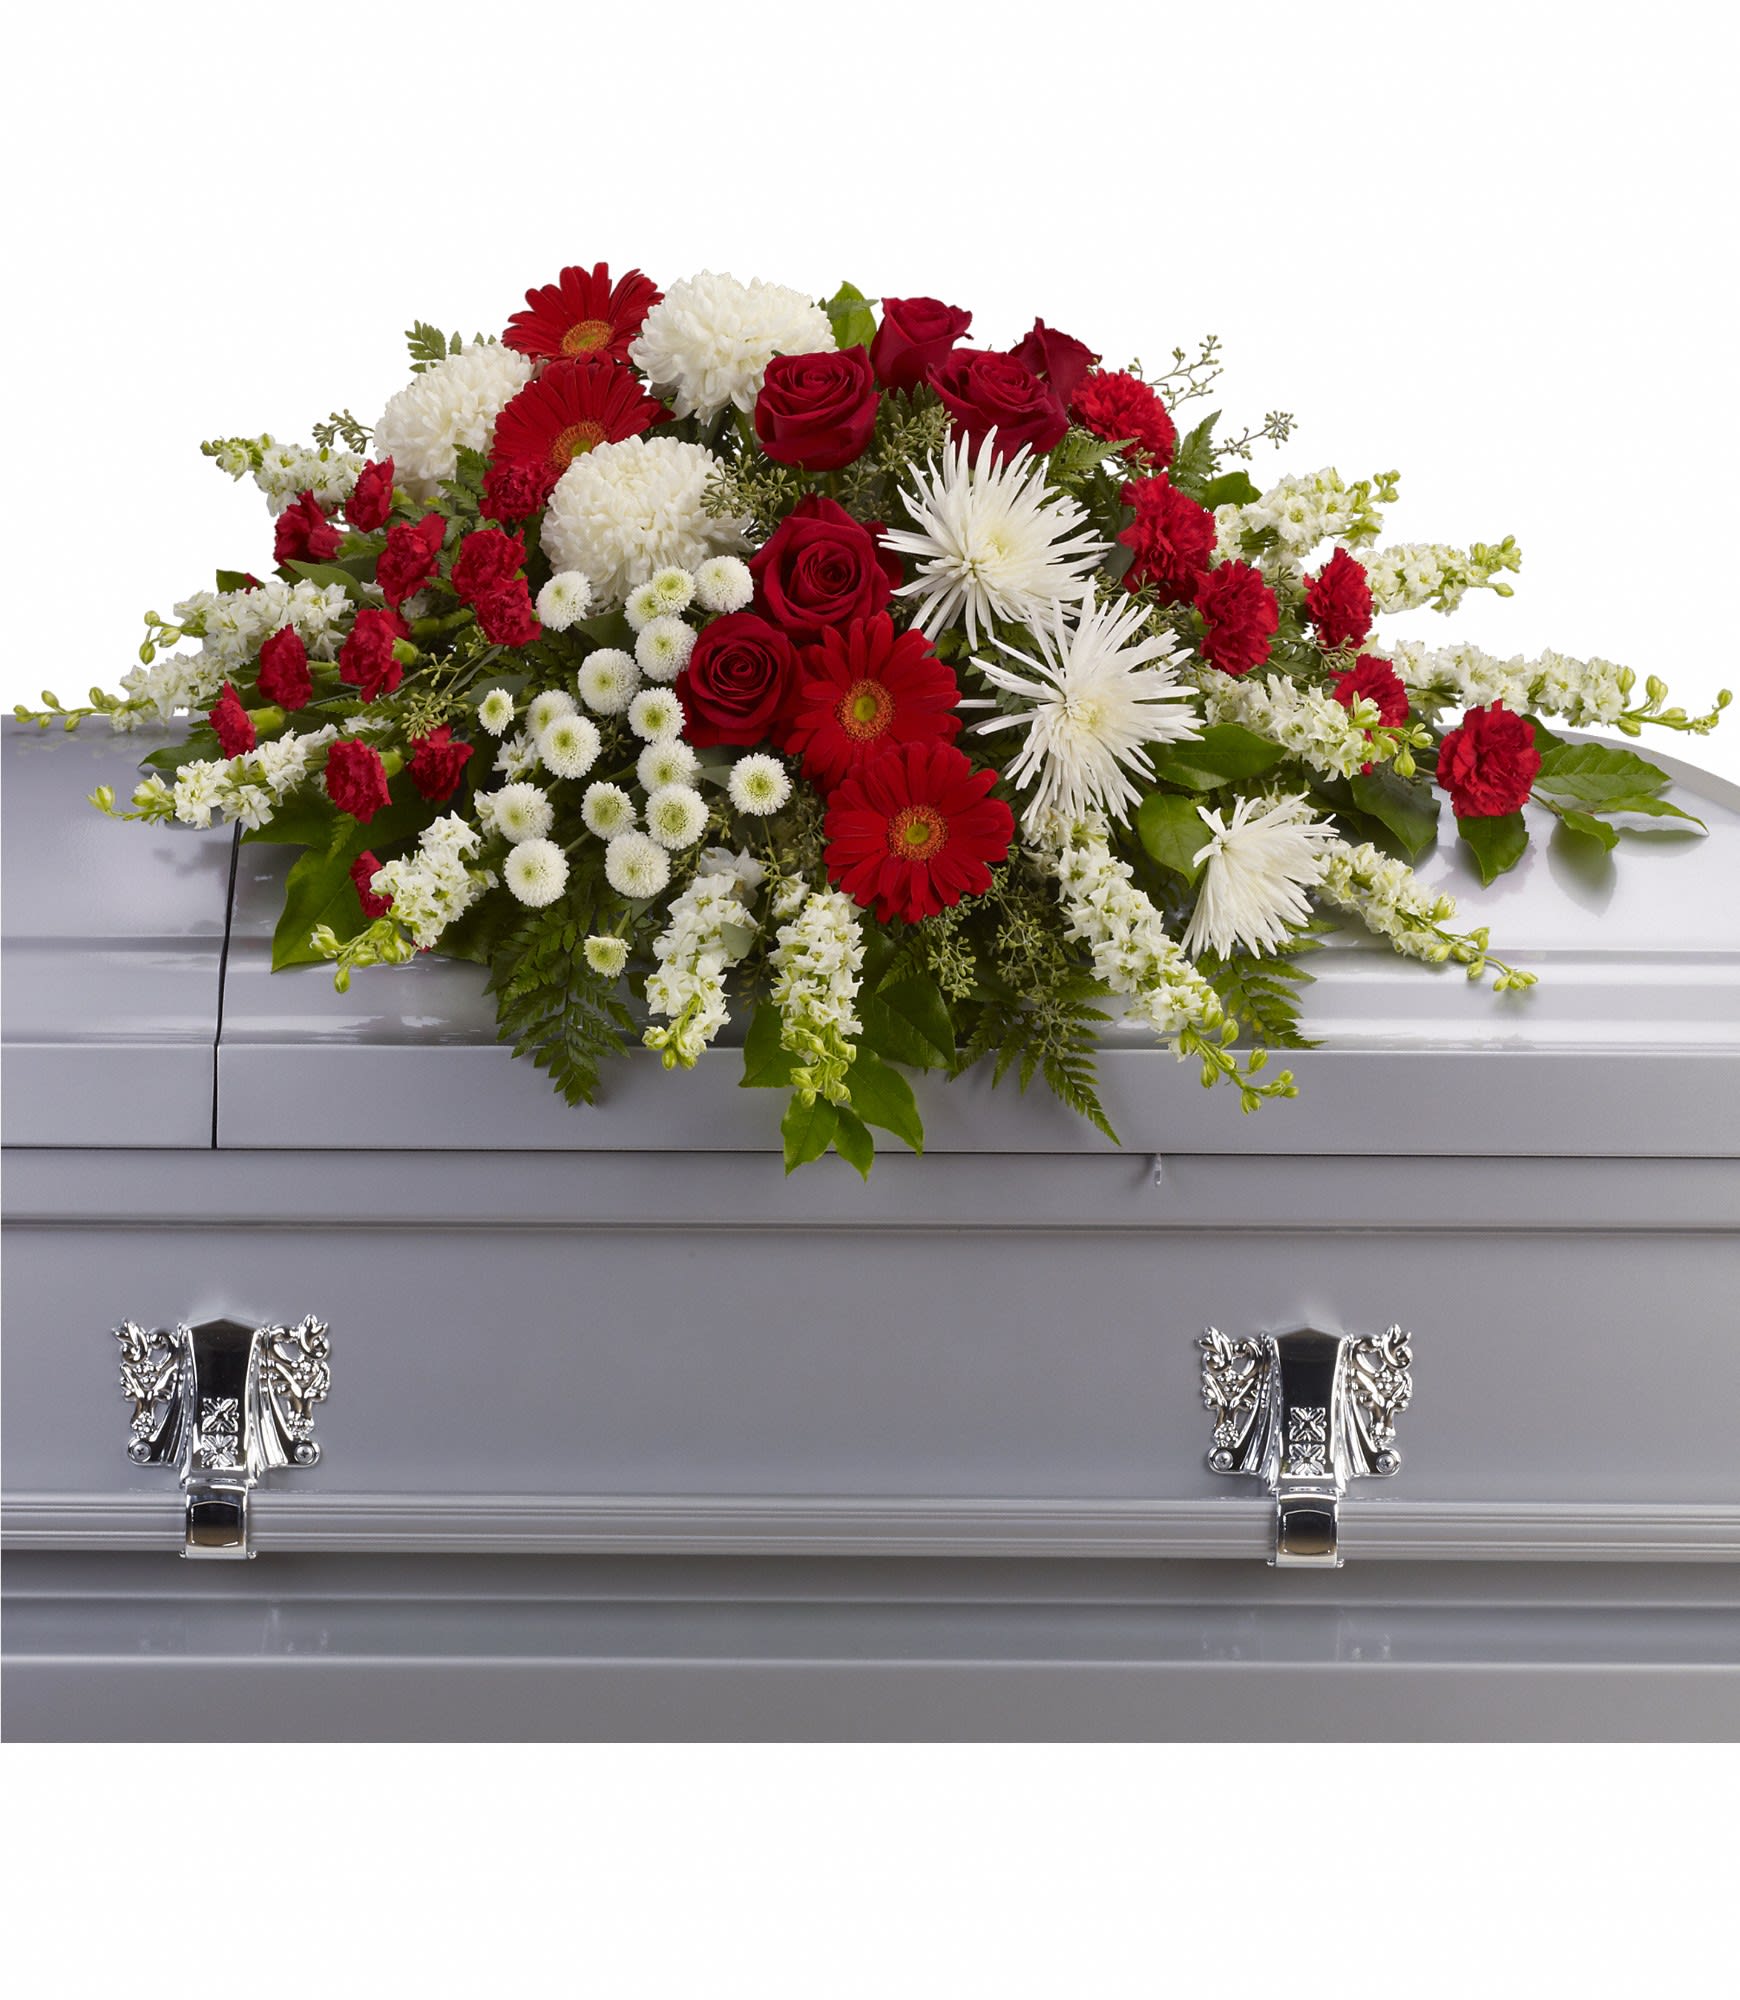 Strength and Wisdom Casket Spray by Teleflora - This beautiful red and white spray will deliver strength and the wisdom to know that there will be brighter days ahead. 